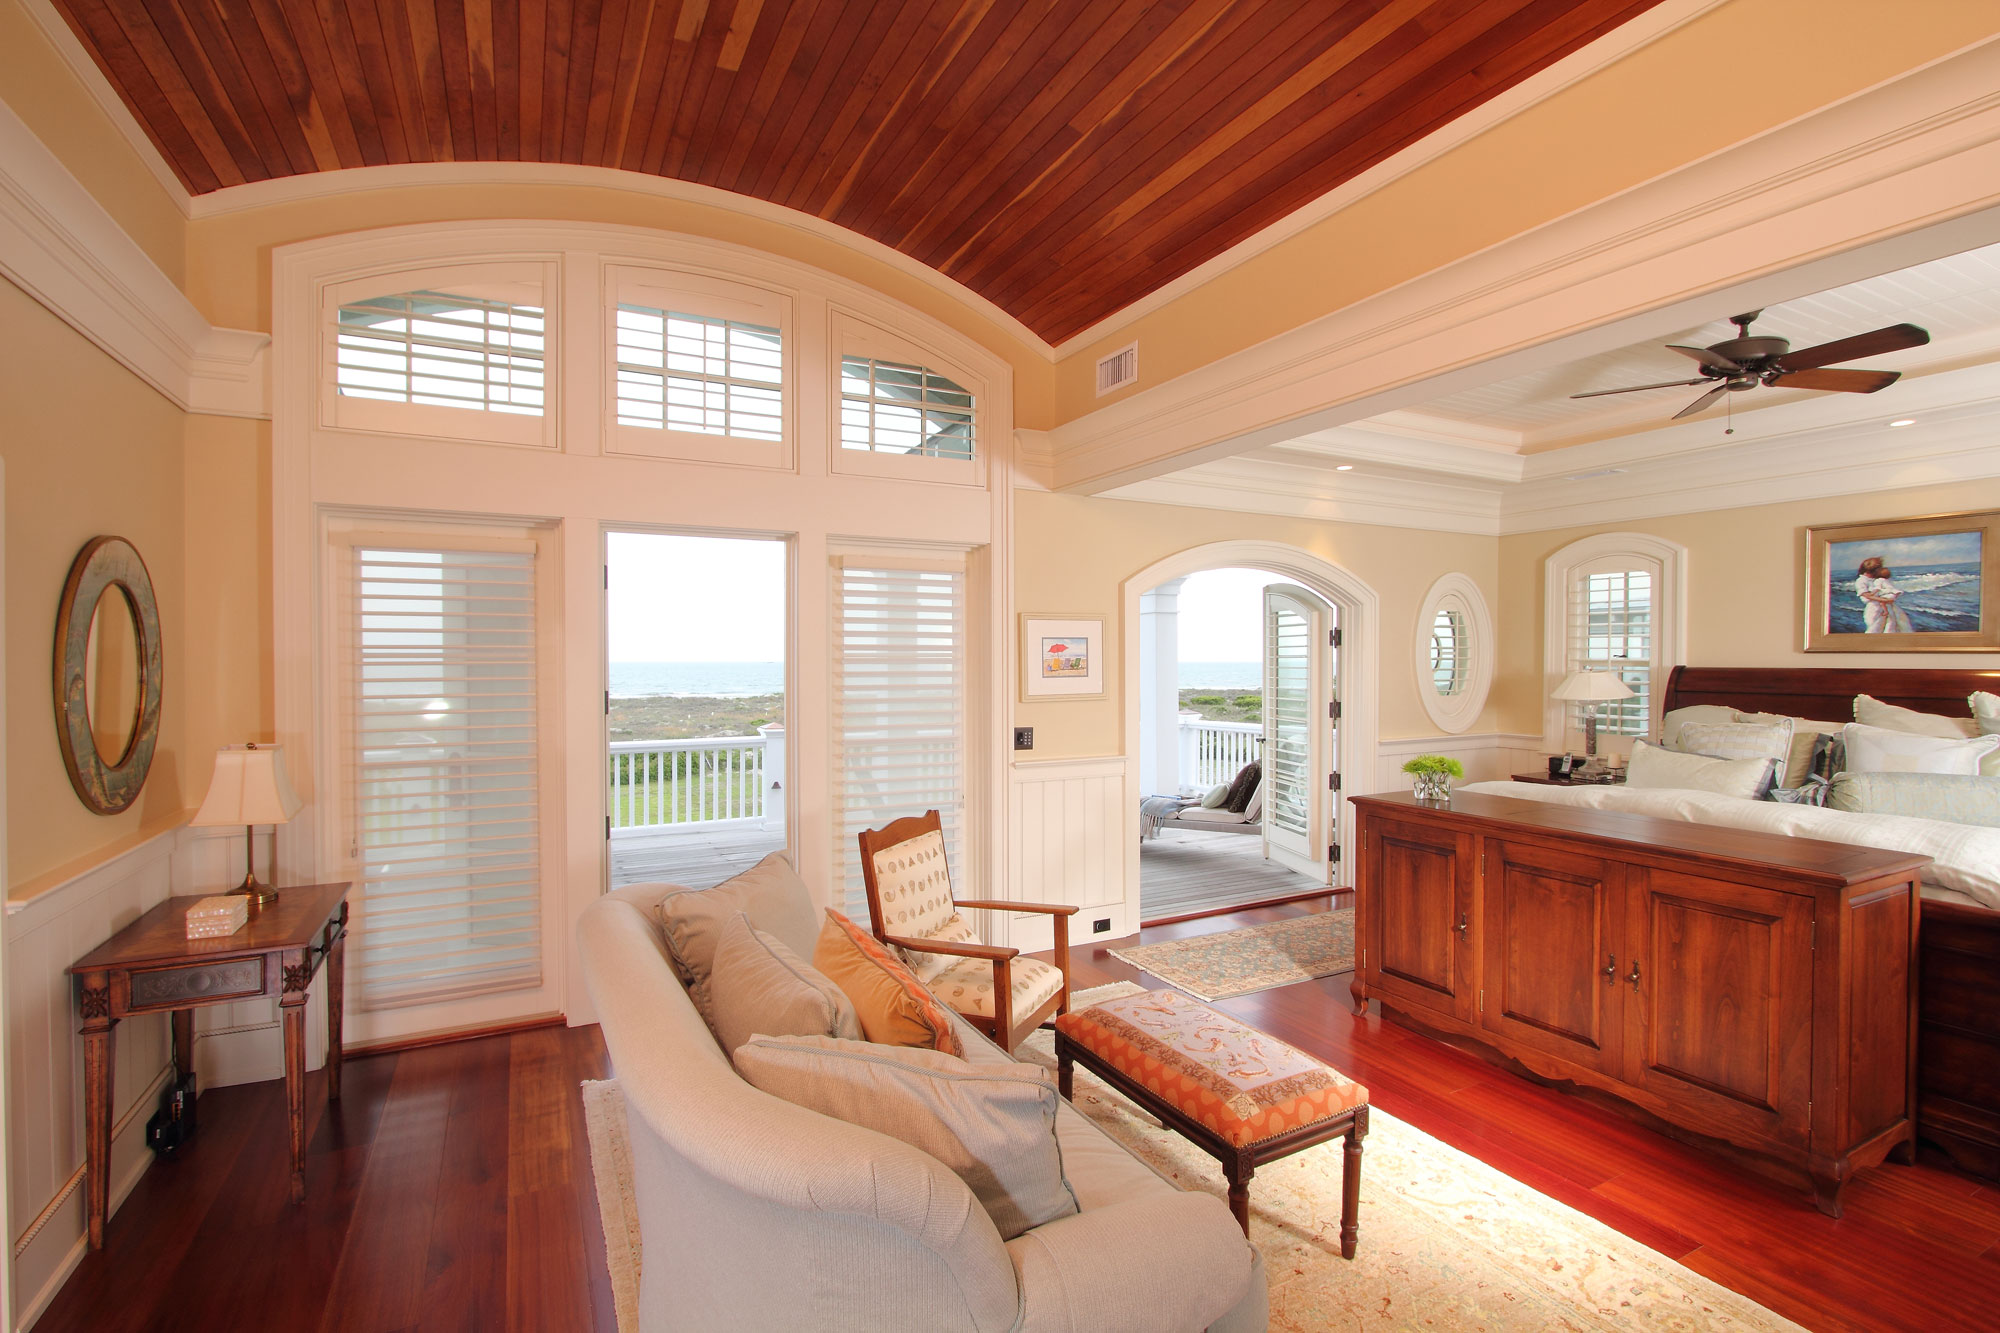 Character ceiling in master bed with stunning ocean view